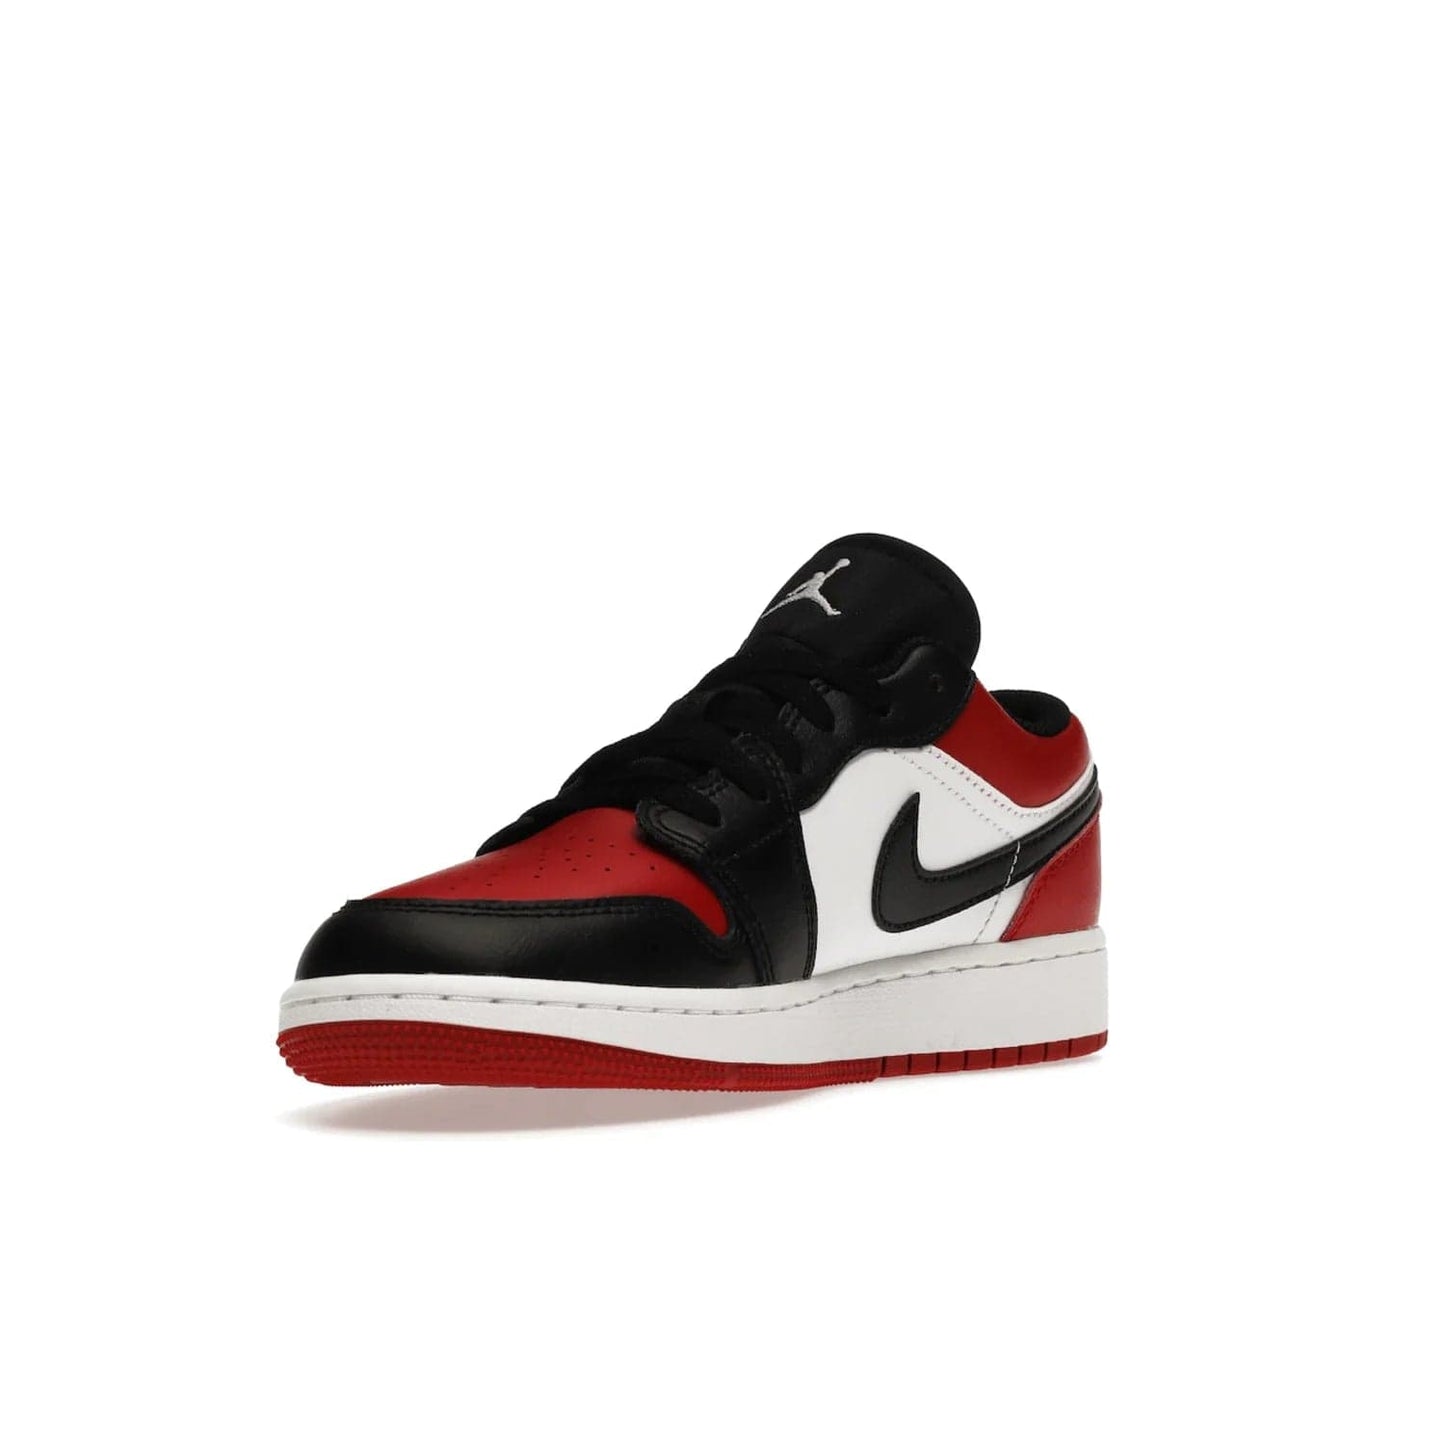 Jordan 1 Low Bred Toe (GS) - Image 14 - Only at www.BallersClubKickz.com - #
Iconic sneaker from Jordan brand with classic colorway, unique detailing & Air Jordan Wings logo. Step into the shoes of the greats with the Jordan 1 Low Bred Toe GS!